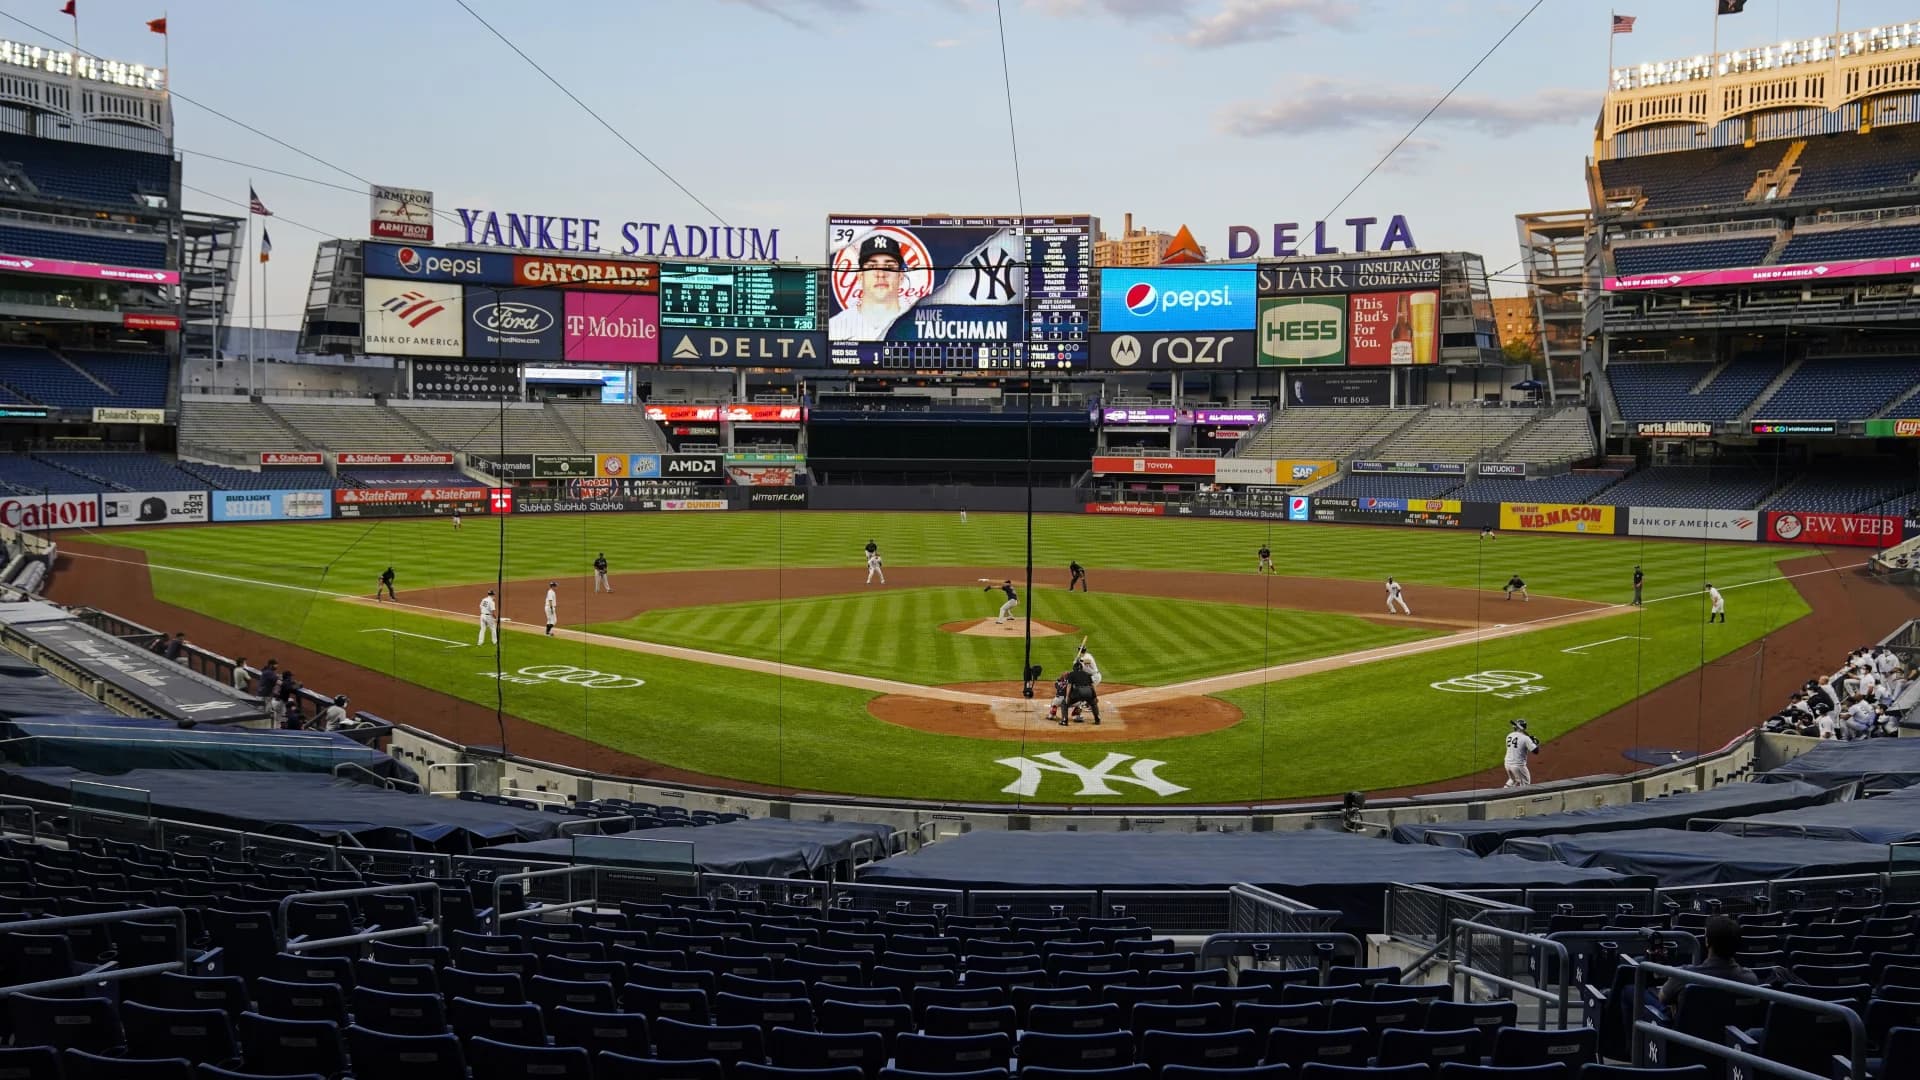 Fan guide: What to expect at Yankee Stadium during the 2021 season